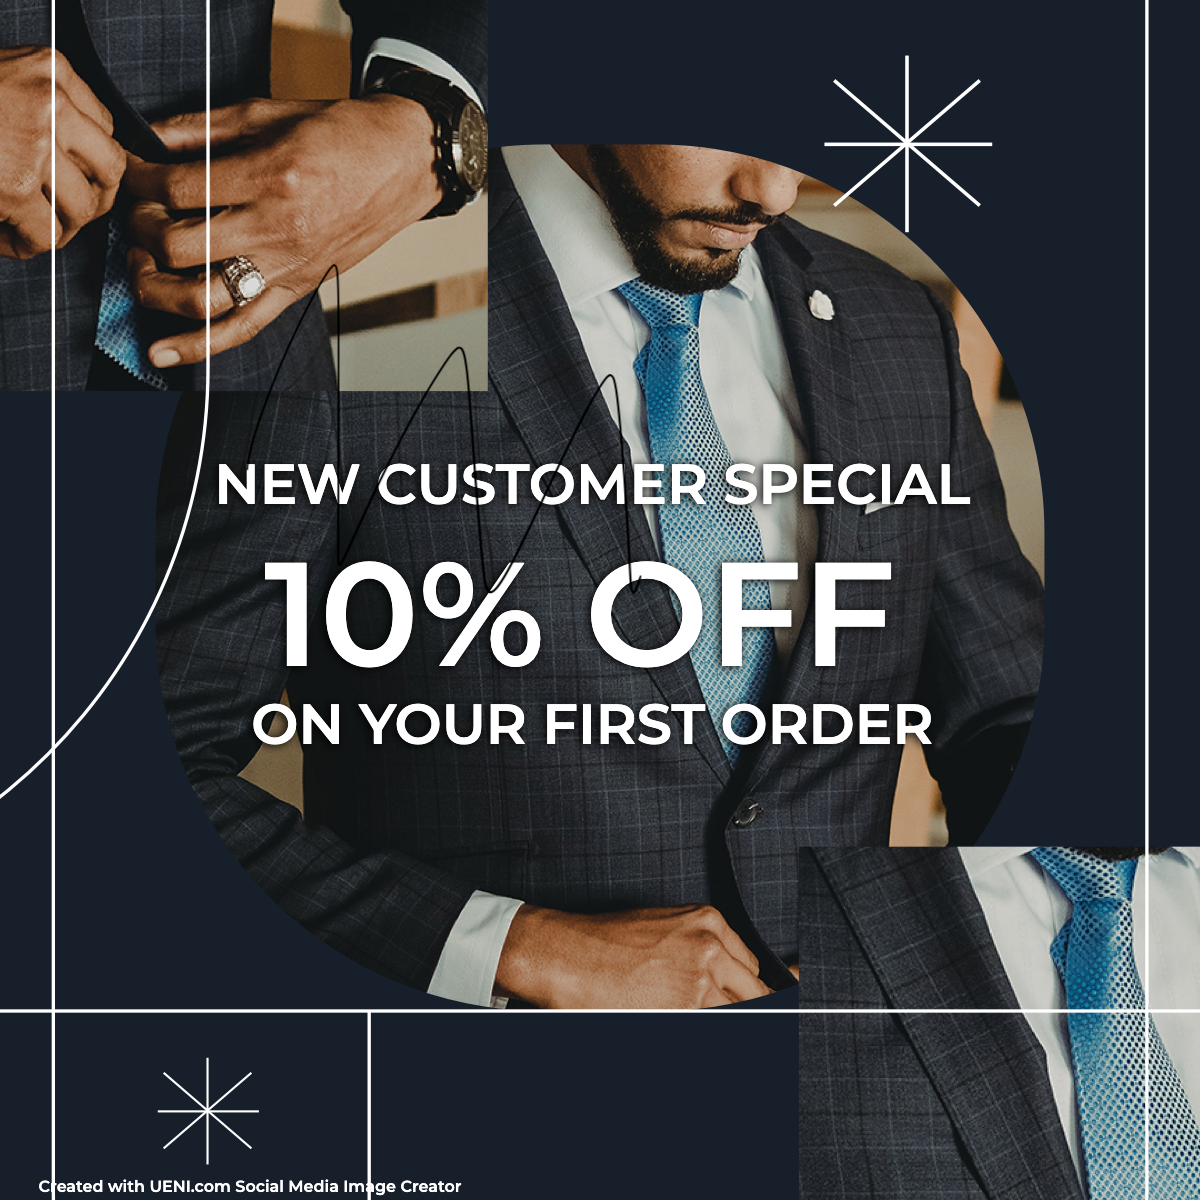 10% off first order!